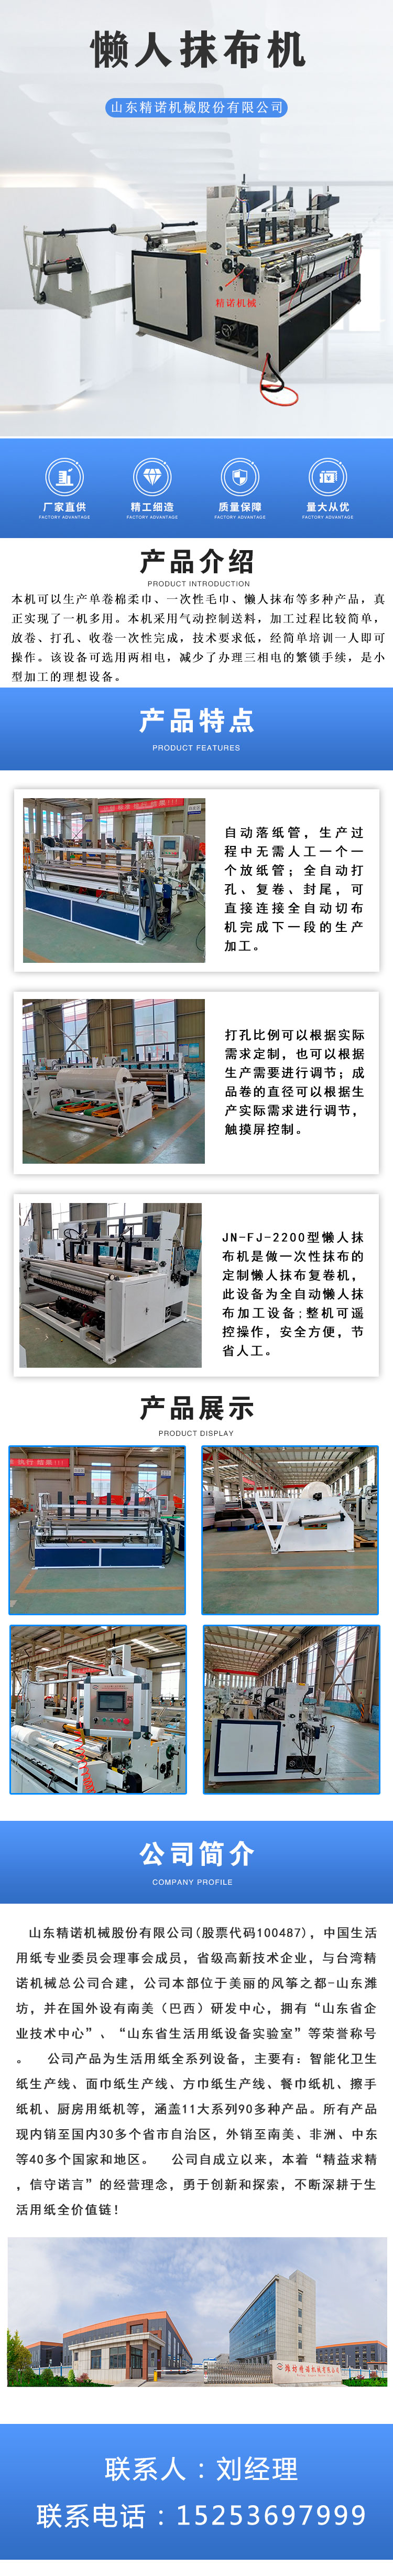 Kitchen disposable lazy cloth cleaning machine, Jingnuo Machinery, multifunctional, one person can operate it